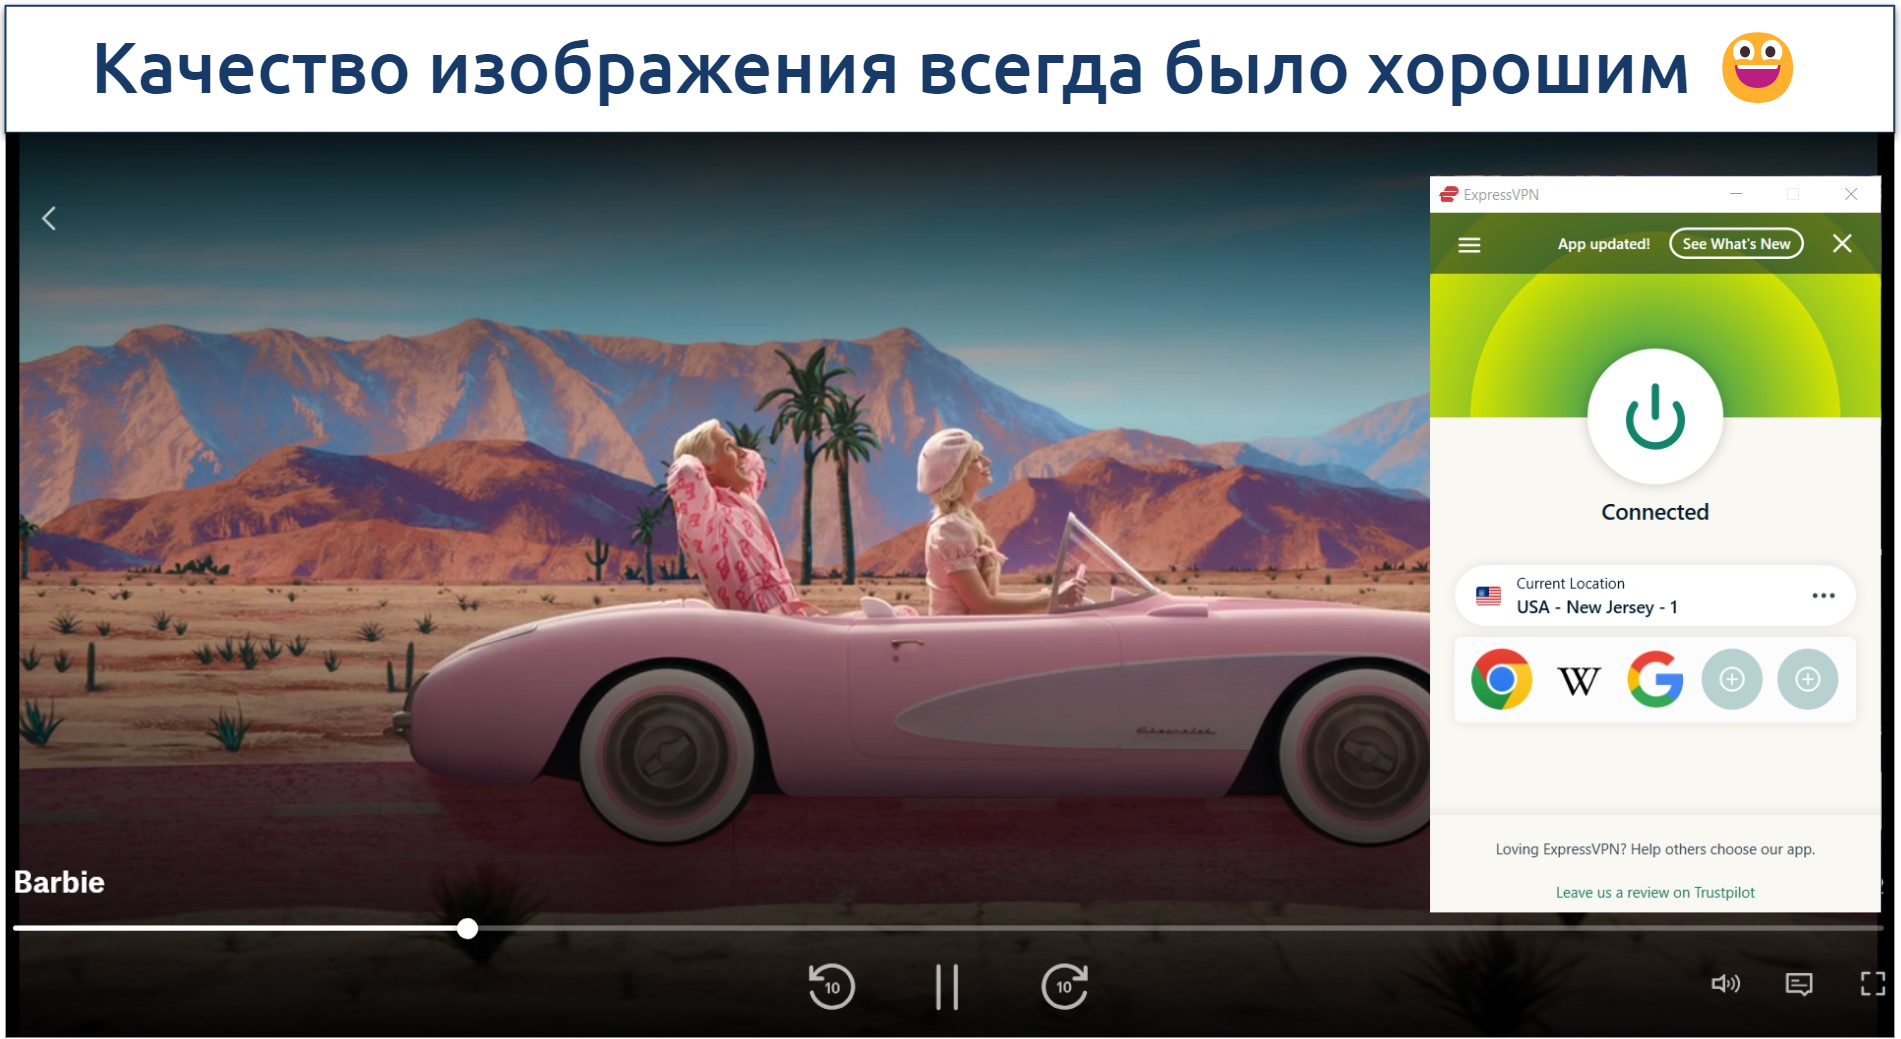 A screenshot of Max streaming Barbie while connected to ExpressVPN's US server